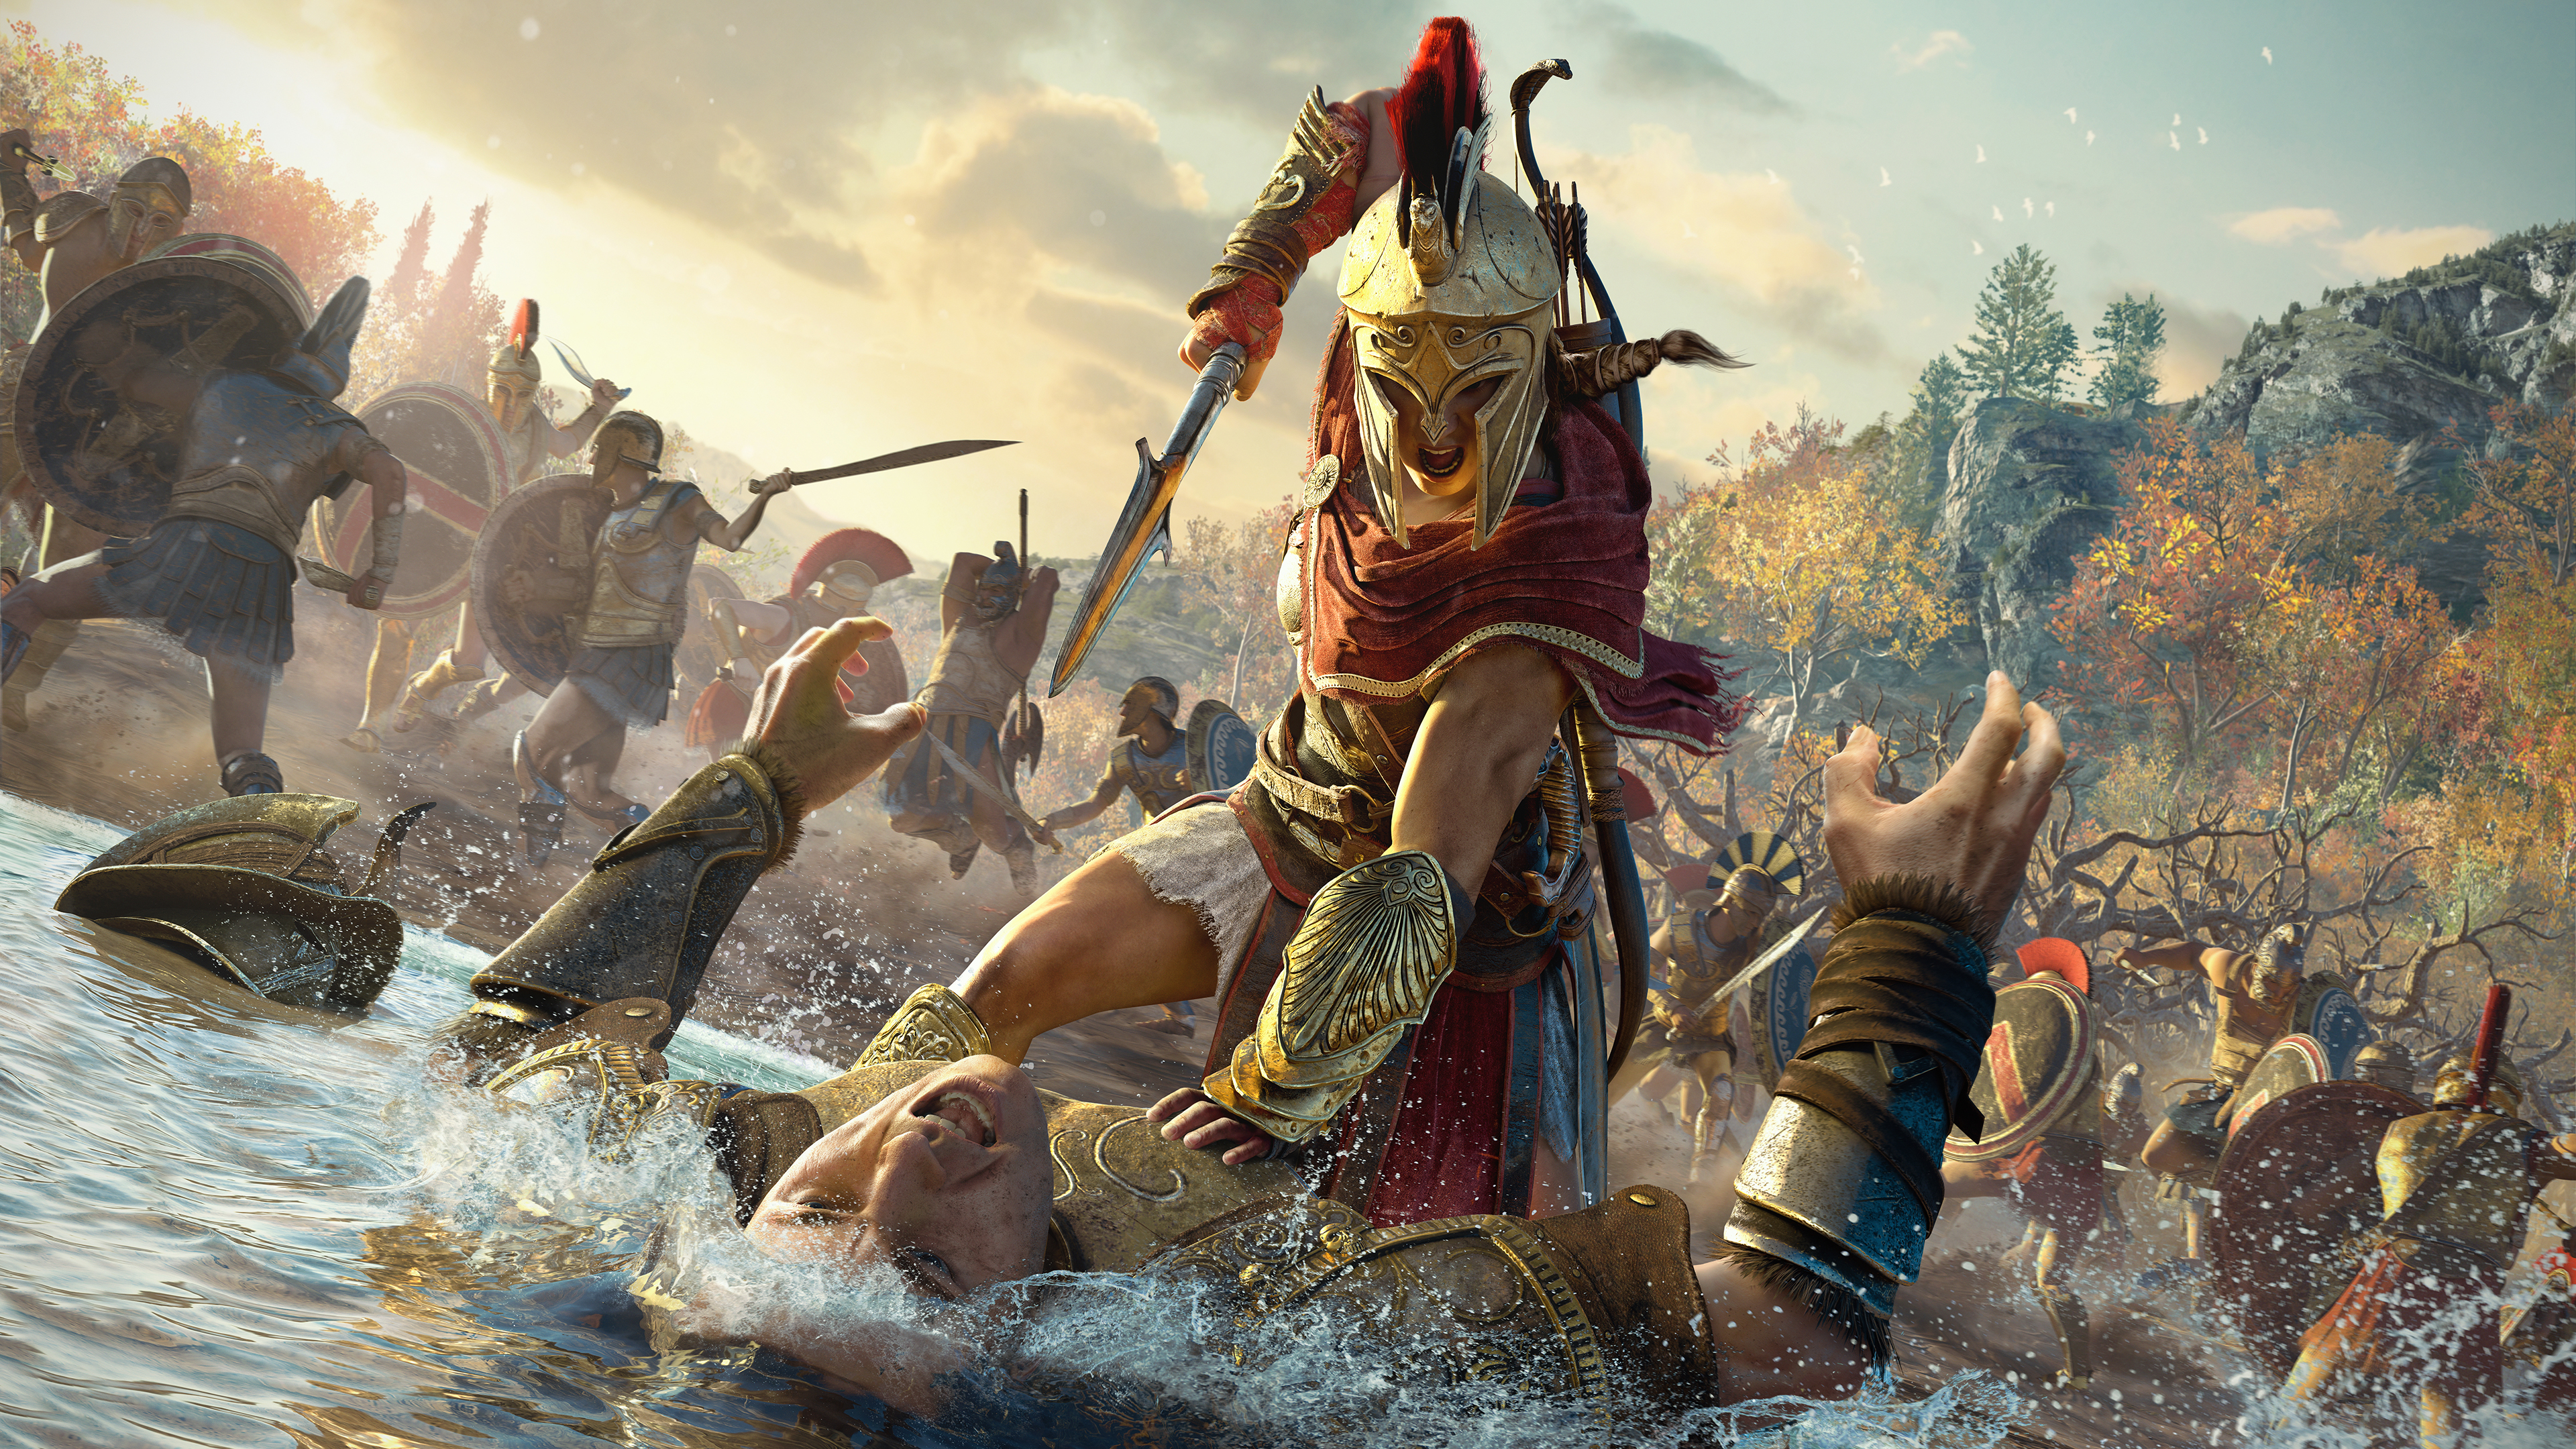 General 3840x2160 video games video game art Assassin's Creed Odyssey Assassin's Creed ancient greece Kassandra